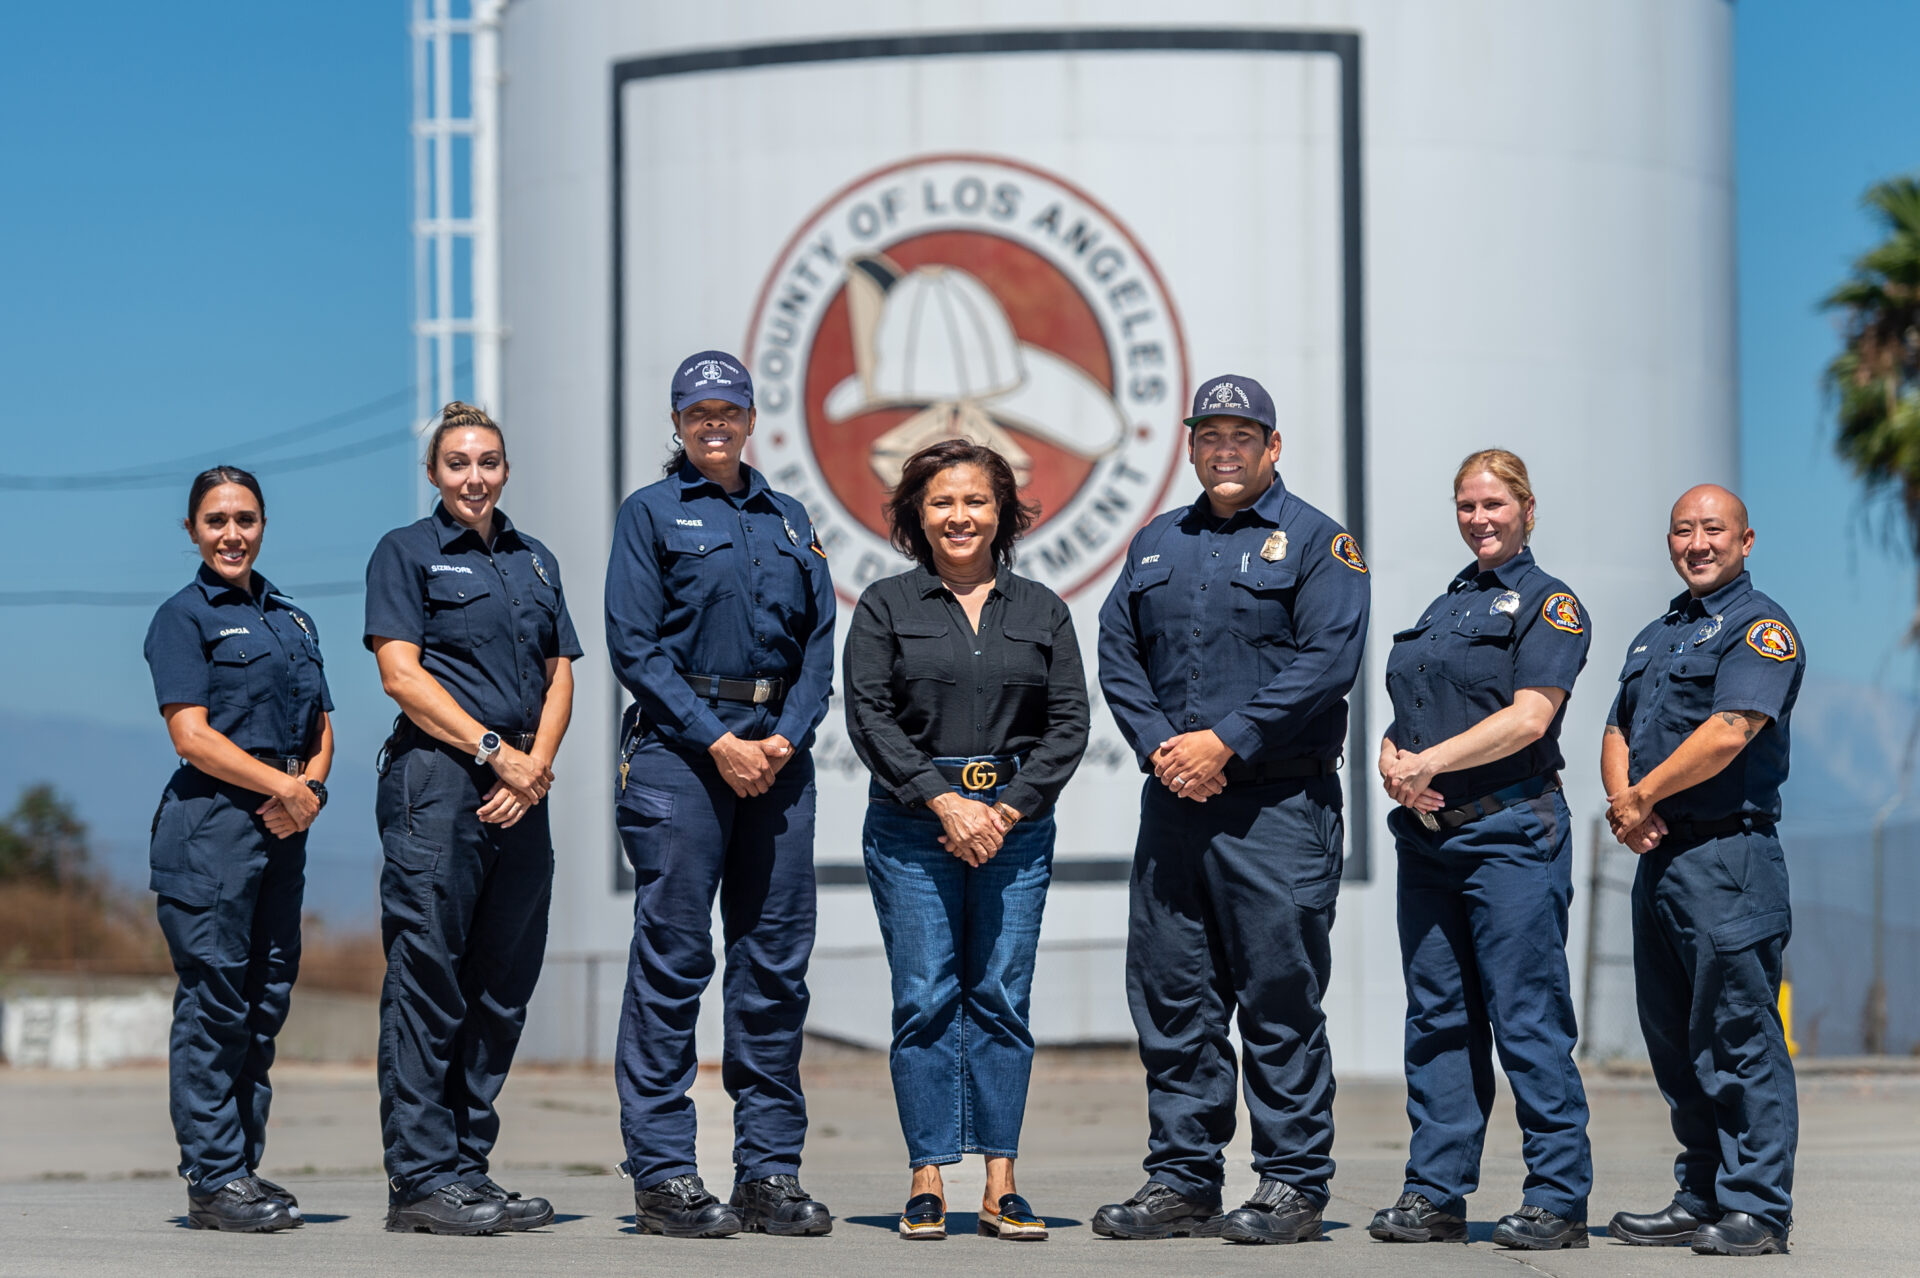 For those ready to Join Our Team and Live the Dream, the County of Los Angeles Fire Department’s (LACoFD) Community Outreach, Recruitment, Diversity, and Inclusion (CORDI) Section, and Lifeguard Division recruitment teams are actively participating in recruitment and community engagement events.